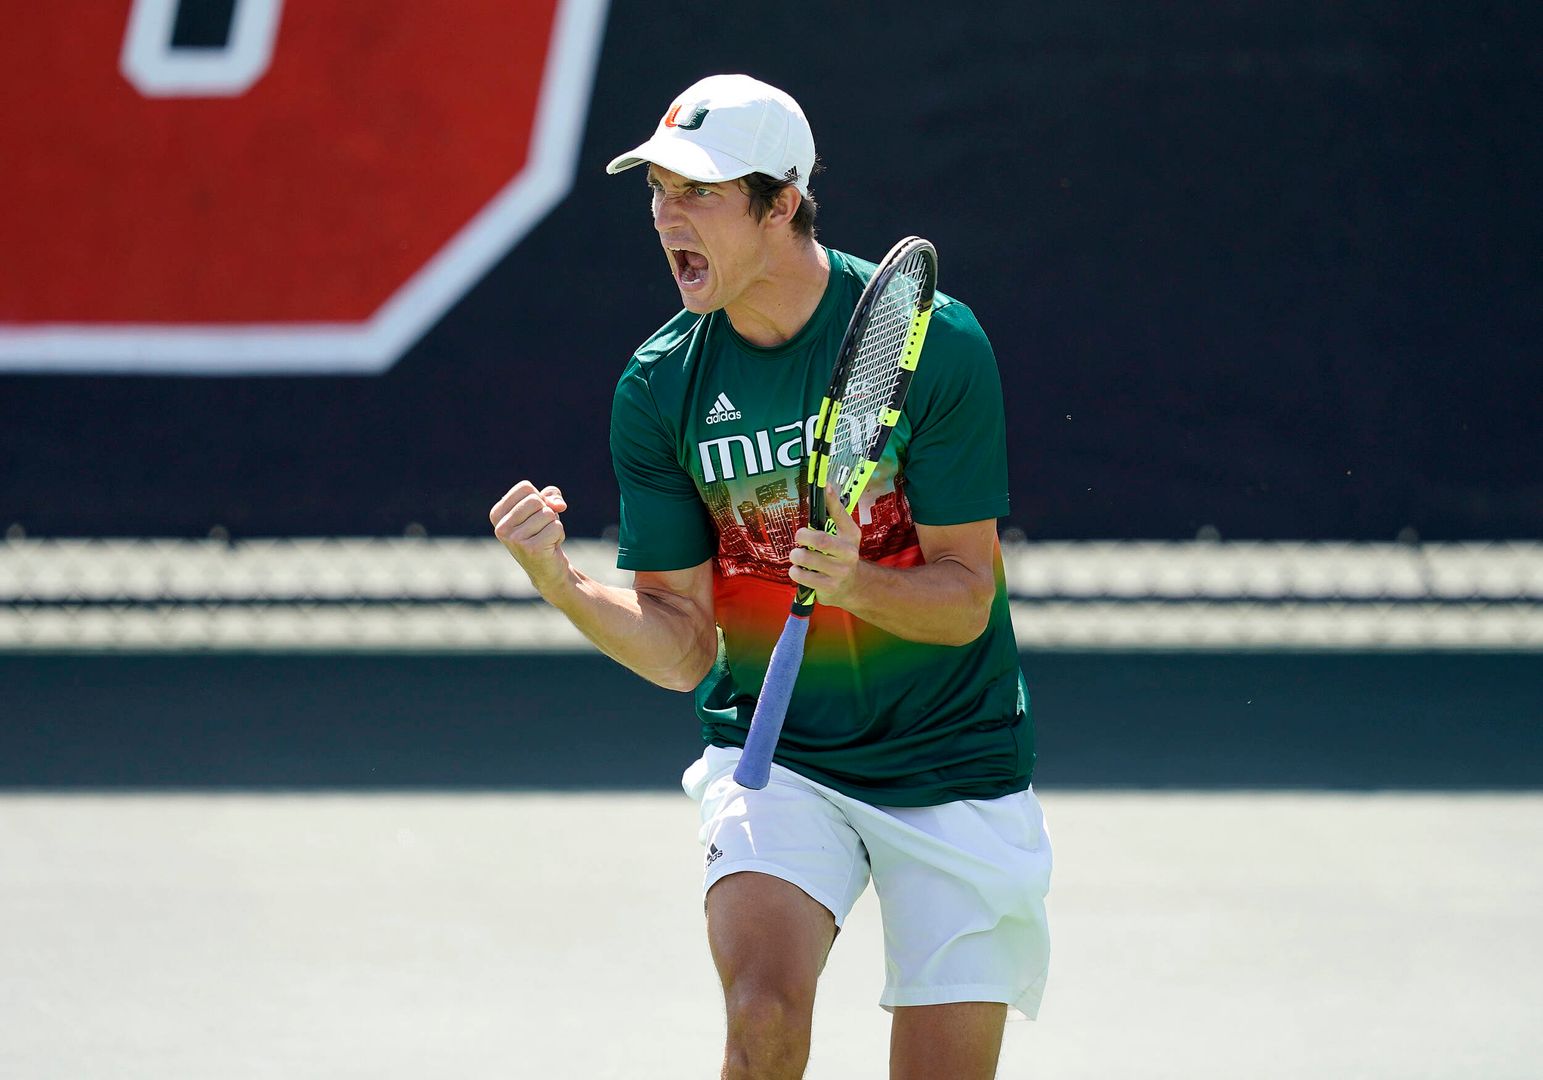 Aubone and Hannestad Win ACC Doubles Team of the Week